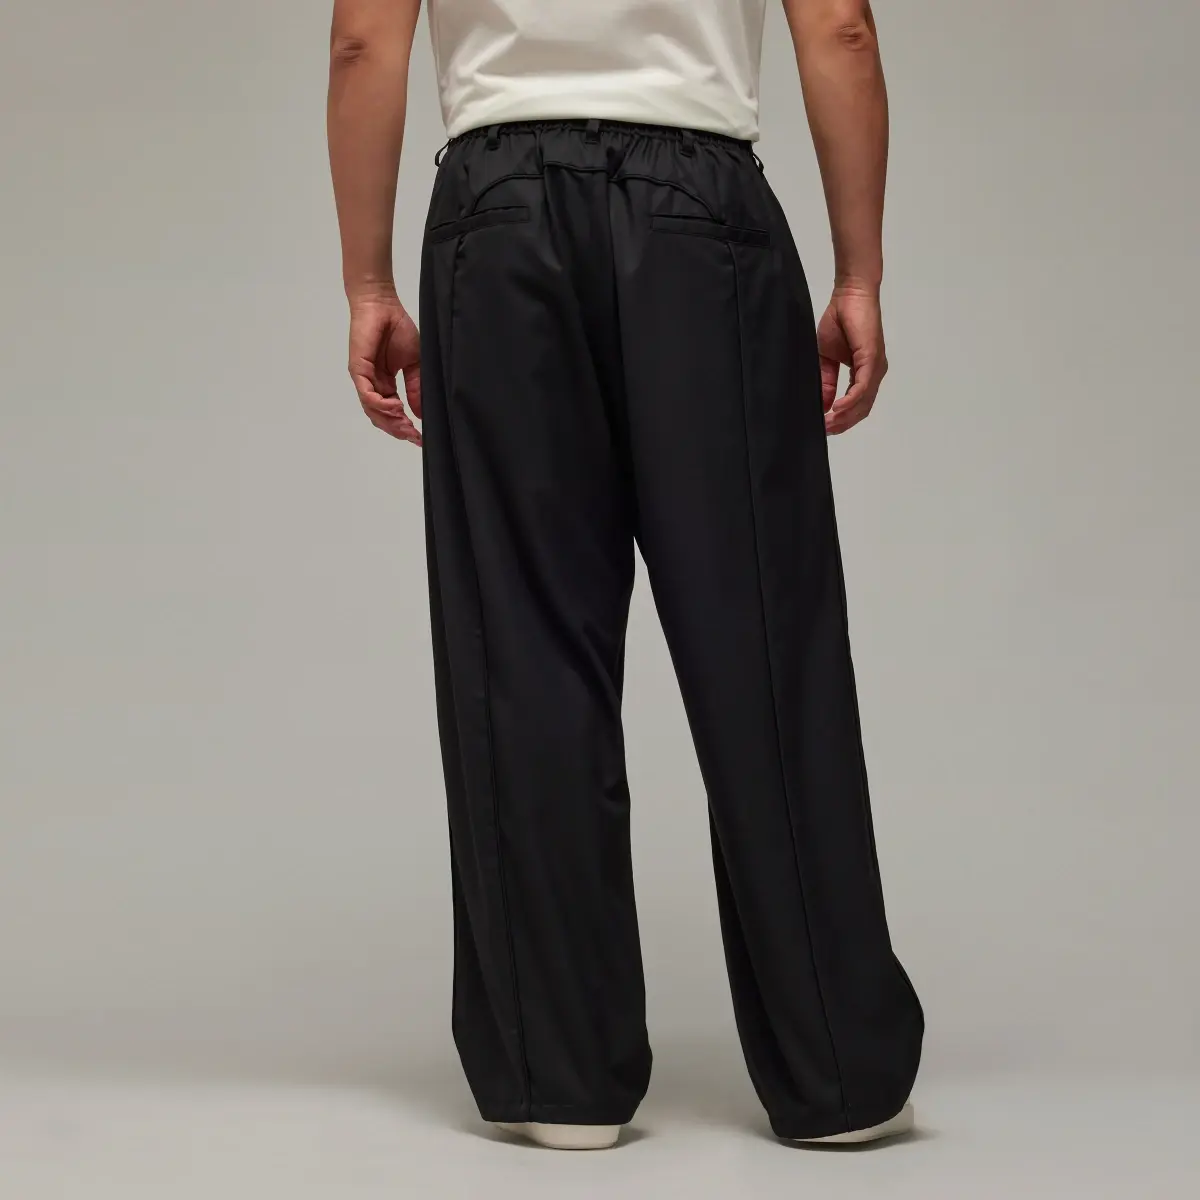 Adidas Y-3 Refined Woven Straight Leg Tracksuit Bottoms. 3